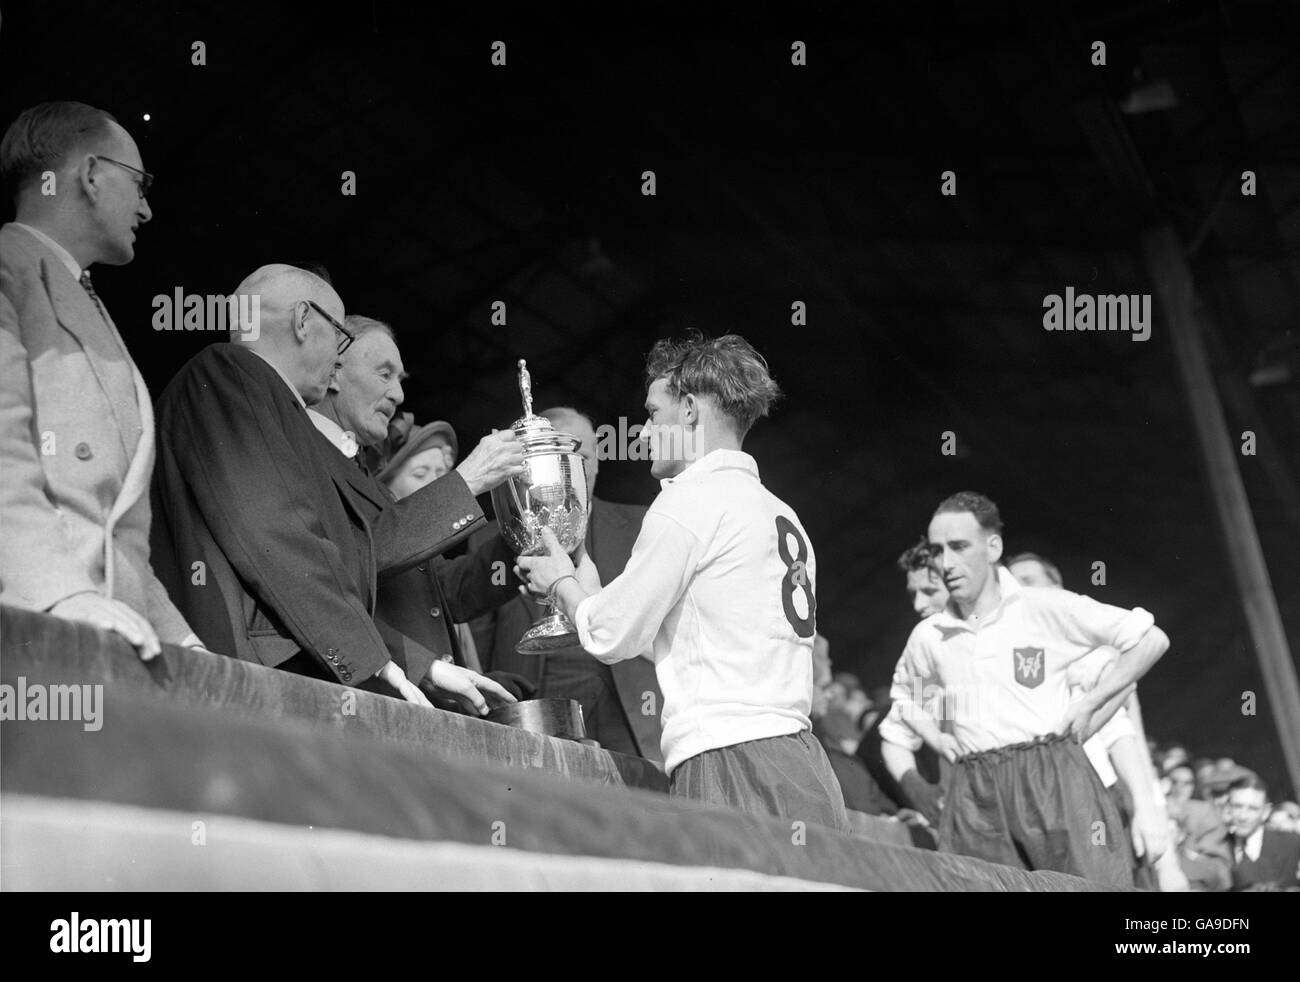 Eddie Taylor, Willington captain receives the trophy from Lord Wigram, Vice President of the FA, after he led his team to a 4-0 victory at Wembley. Taylor is a shipyard scaffolder by trade. Stock Photo